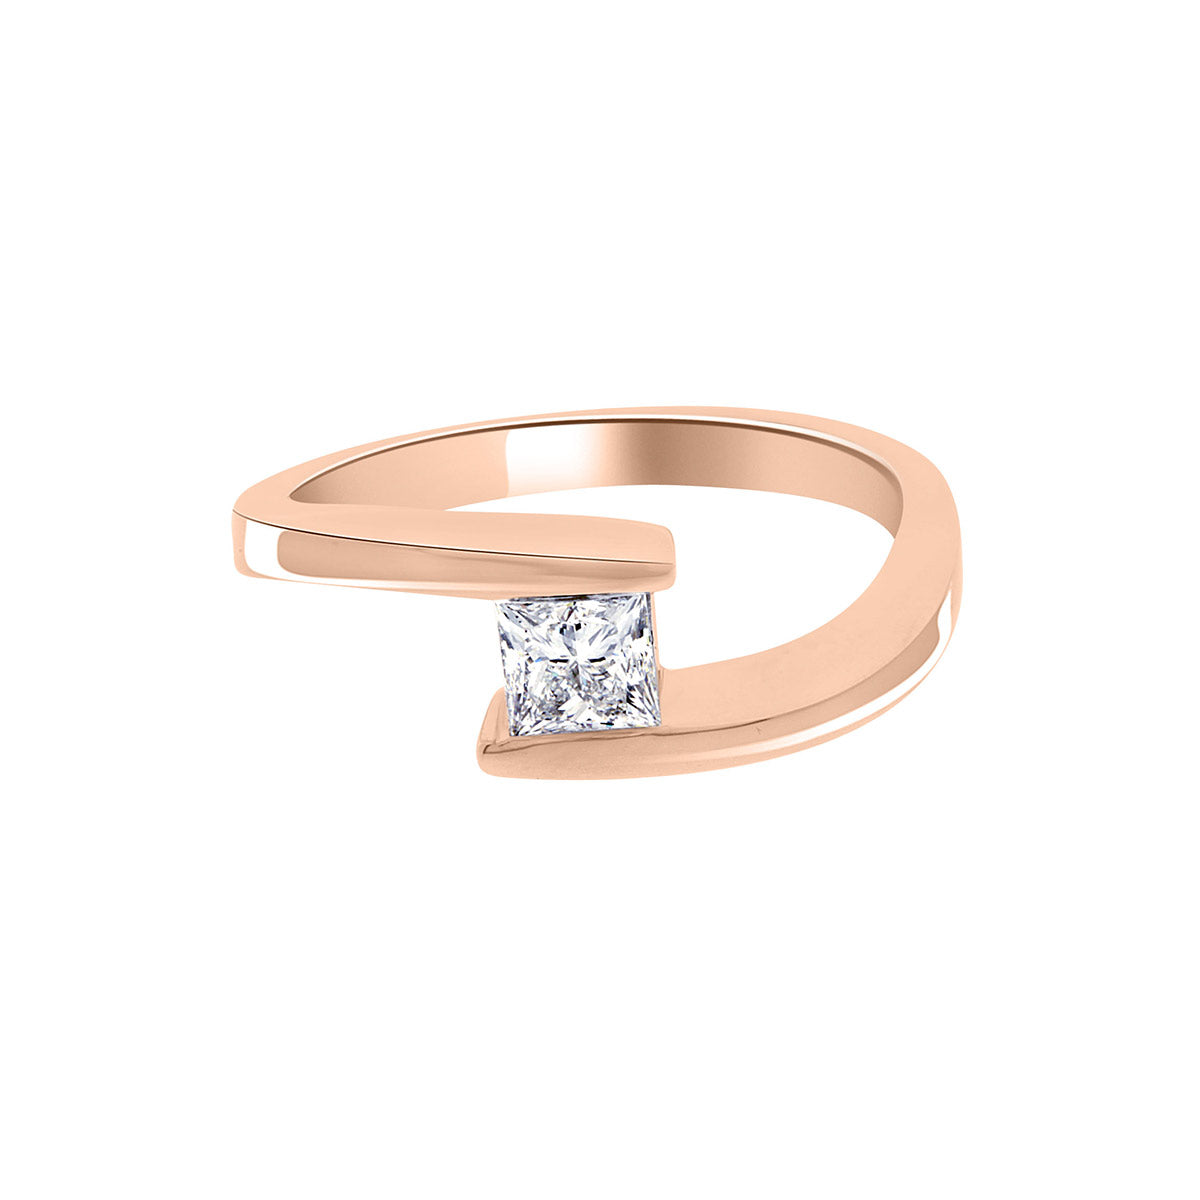 Princess Solitaire Engagement Ring in a rose  gold  tension setting